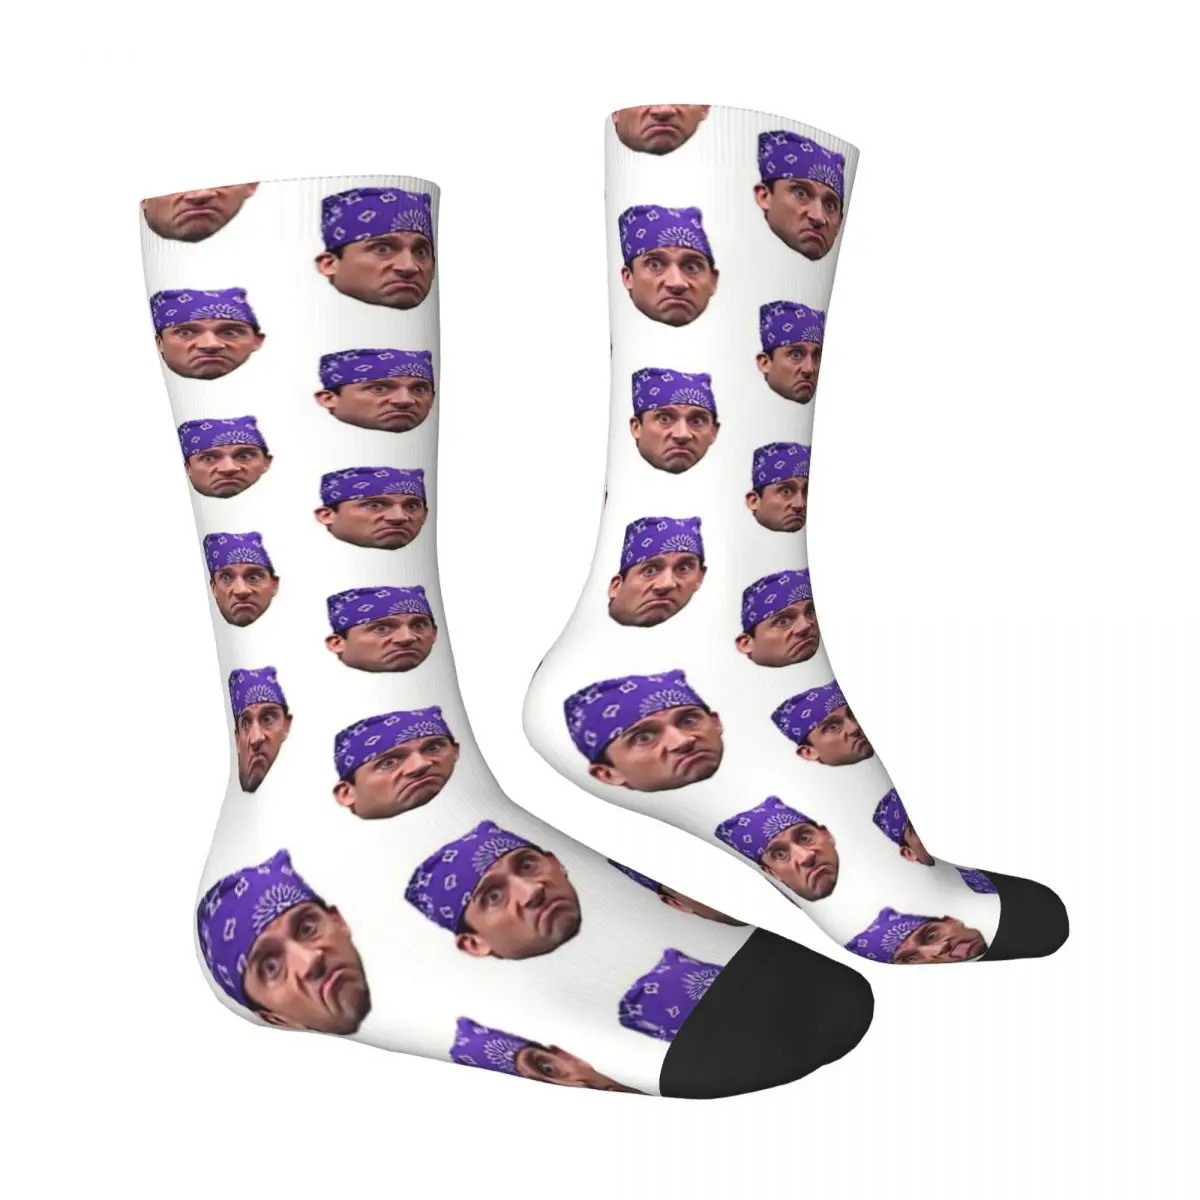 PRISON MIKE stockings Thickened thermal stockings Men's and women's stockings, For Unisex